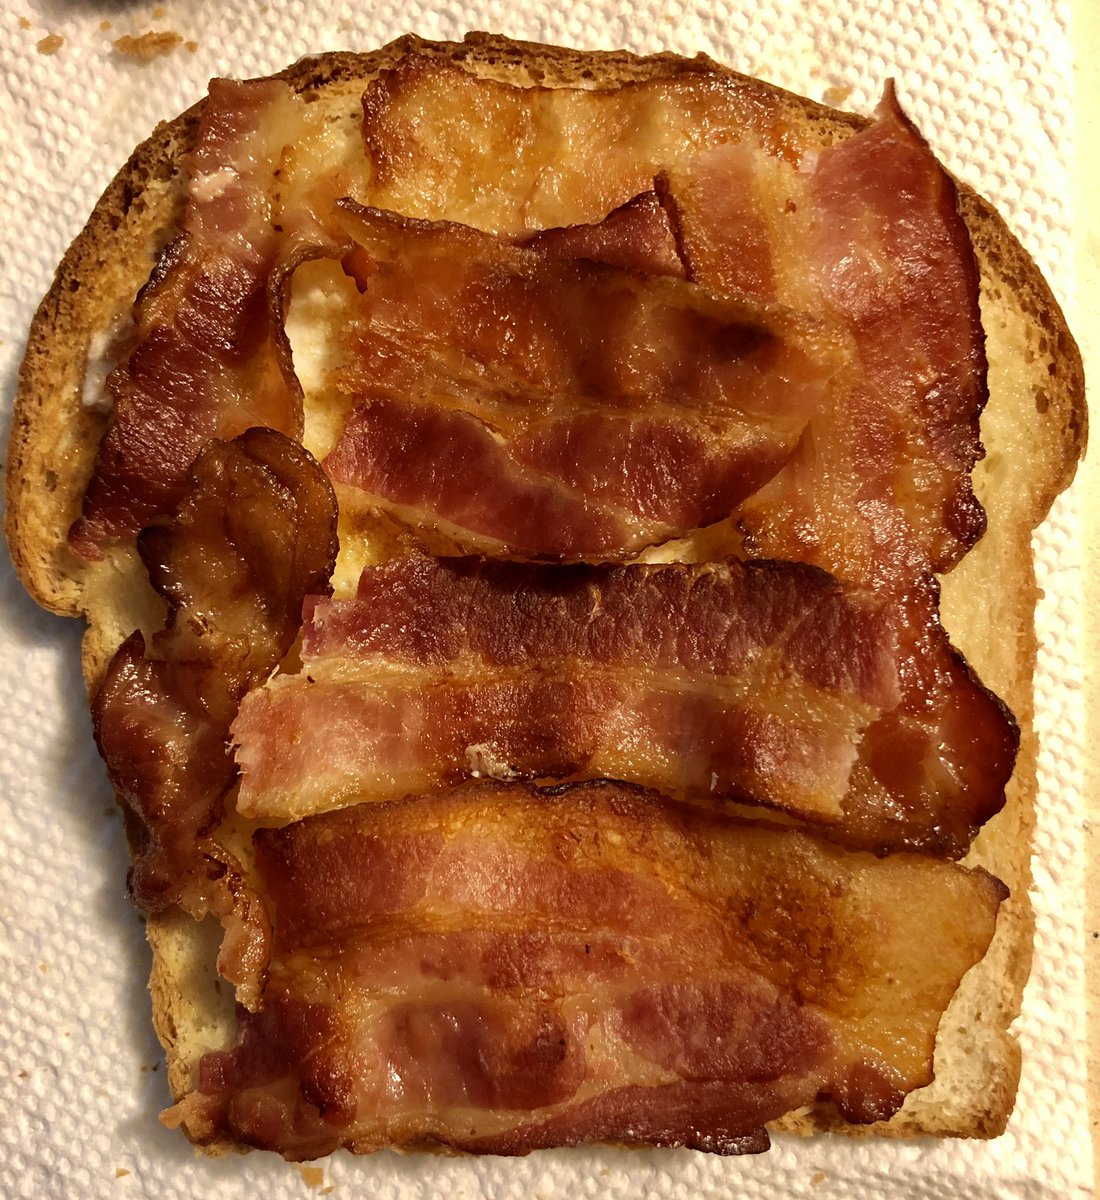 Does anyone else spend like 5 minutes arranging their bacon on their toast? #everybitecounts #analretentive